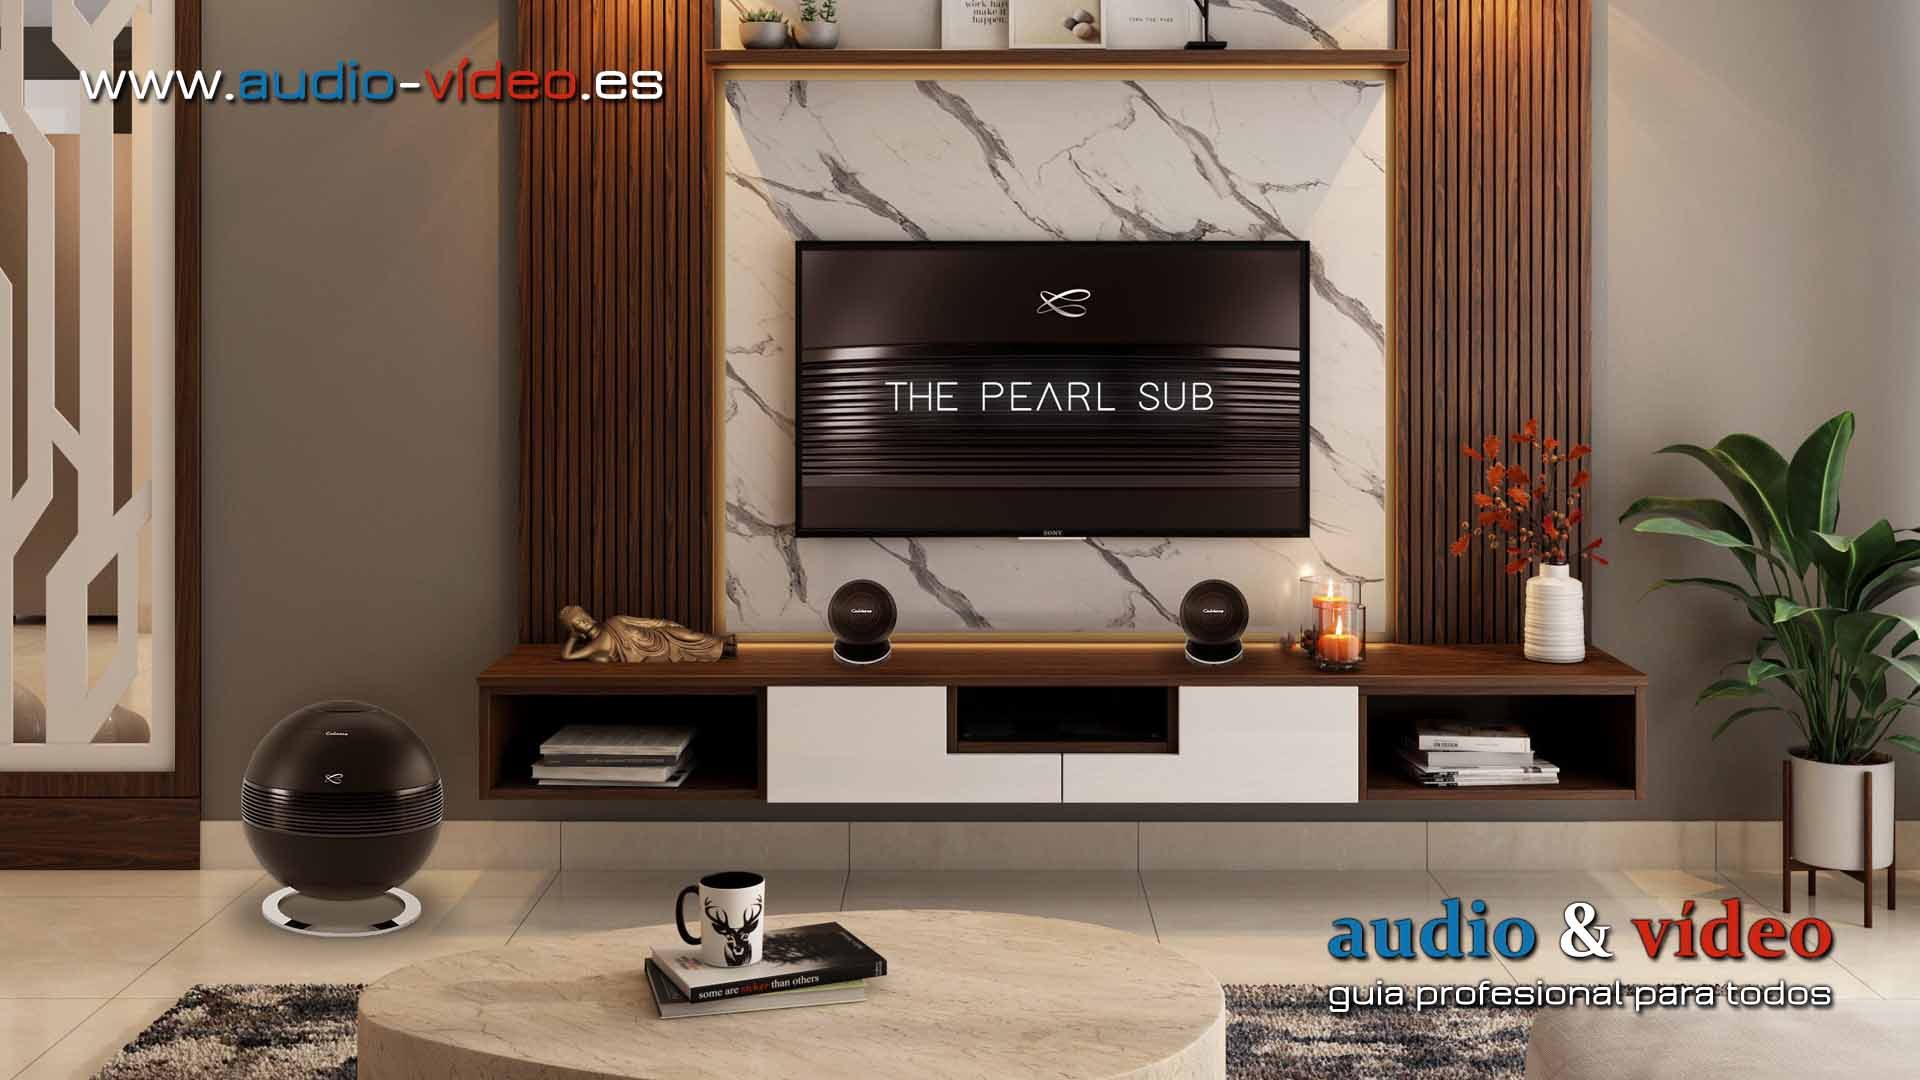 Subwoofer activo – CABASSE – THE PEARL SUB